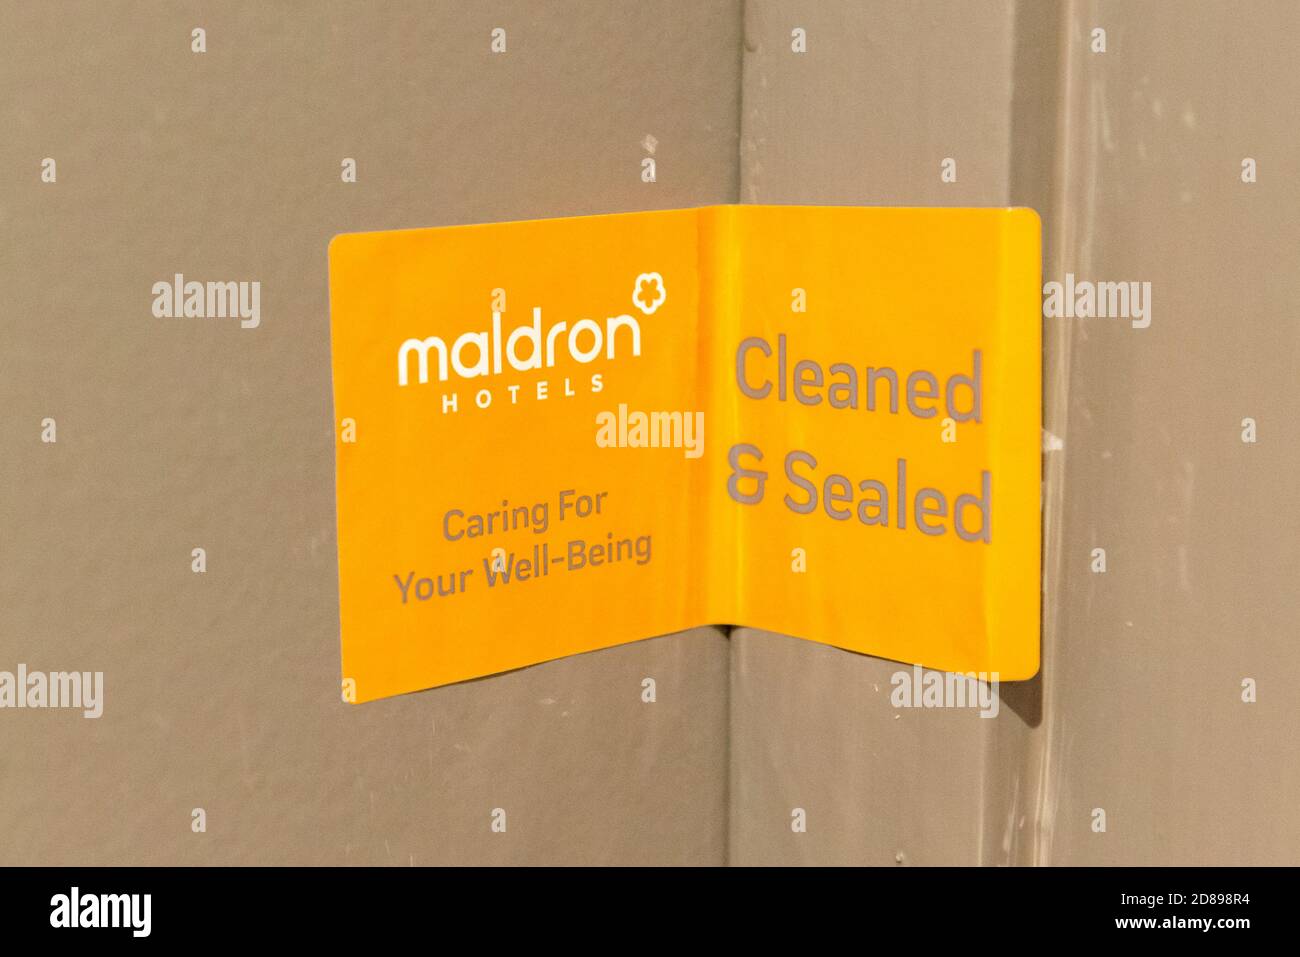 Covid Ireland airport quarantine and orange sticker on Maldron Hotel sealed room door as proof for the room has been cleaned during the Covid 19 pandemic outbreak in Maldron Hotel Dublin Airport Ireland Europe as of October 2020. Stock Photo